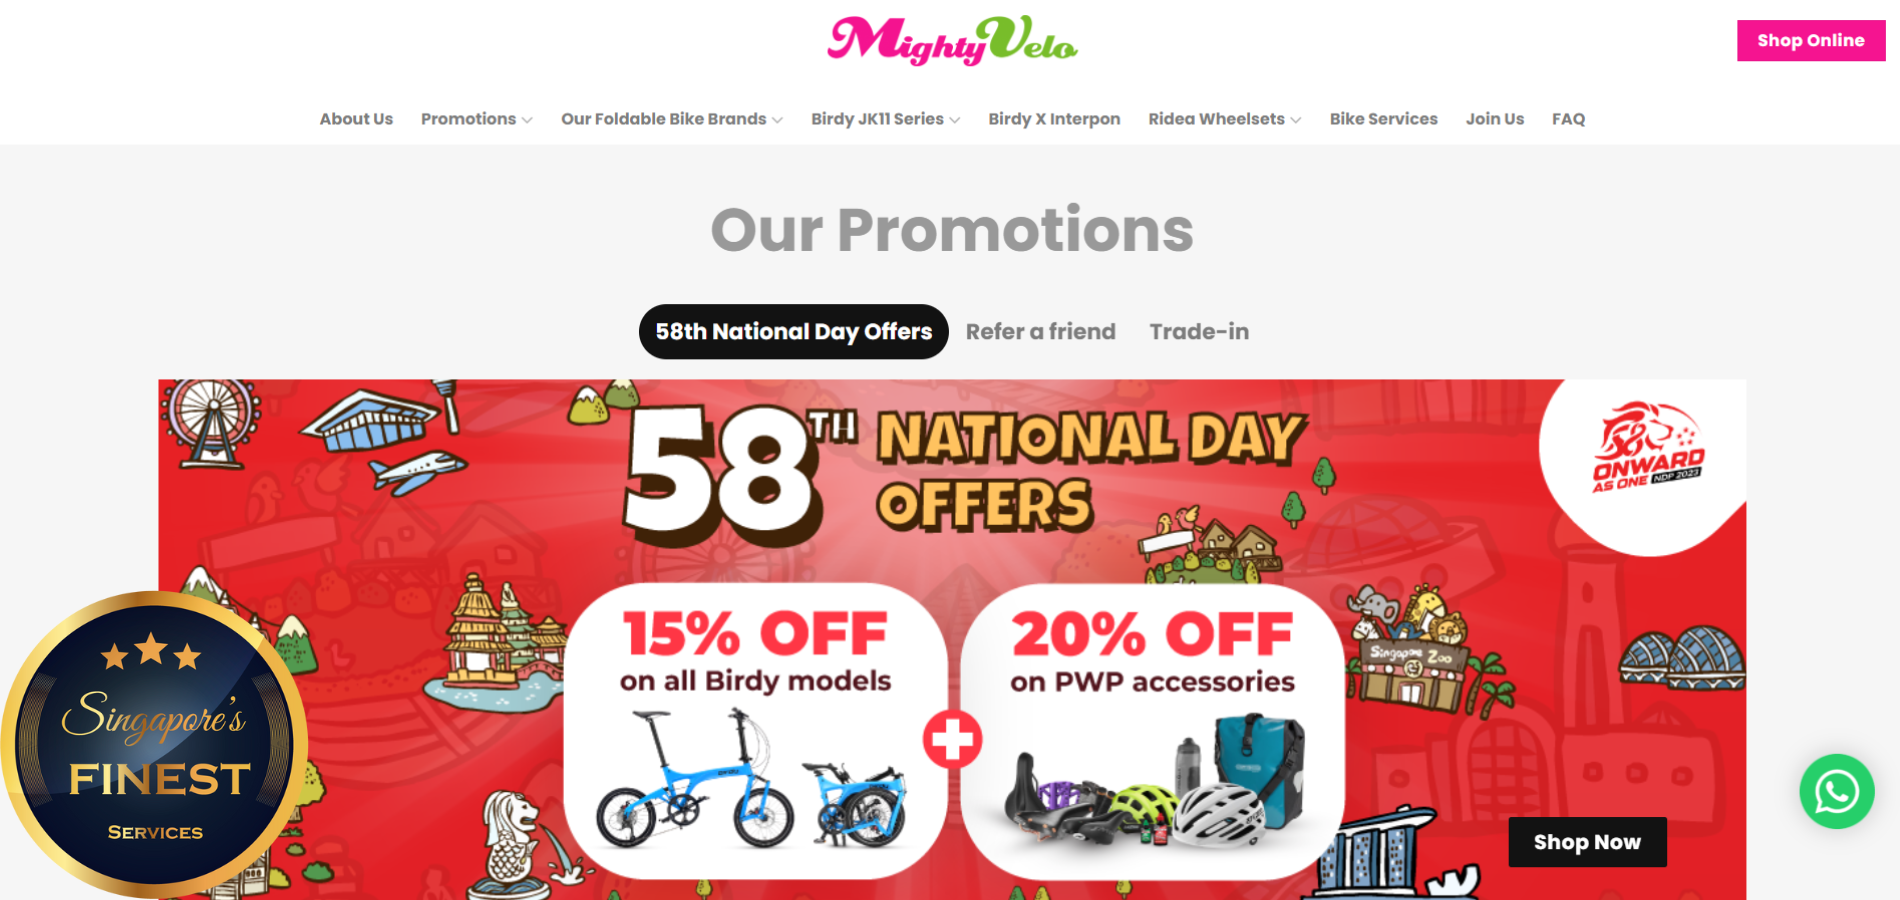 The Finest Foldable Bicycle Shops in Singapore